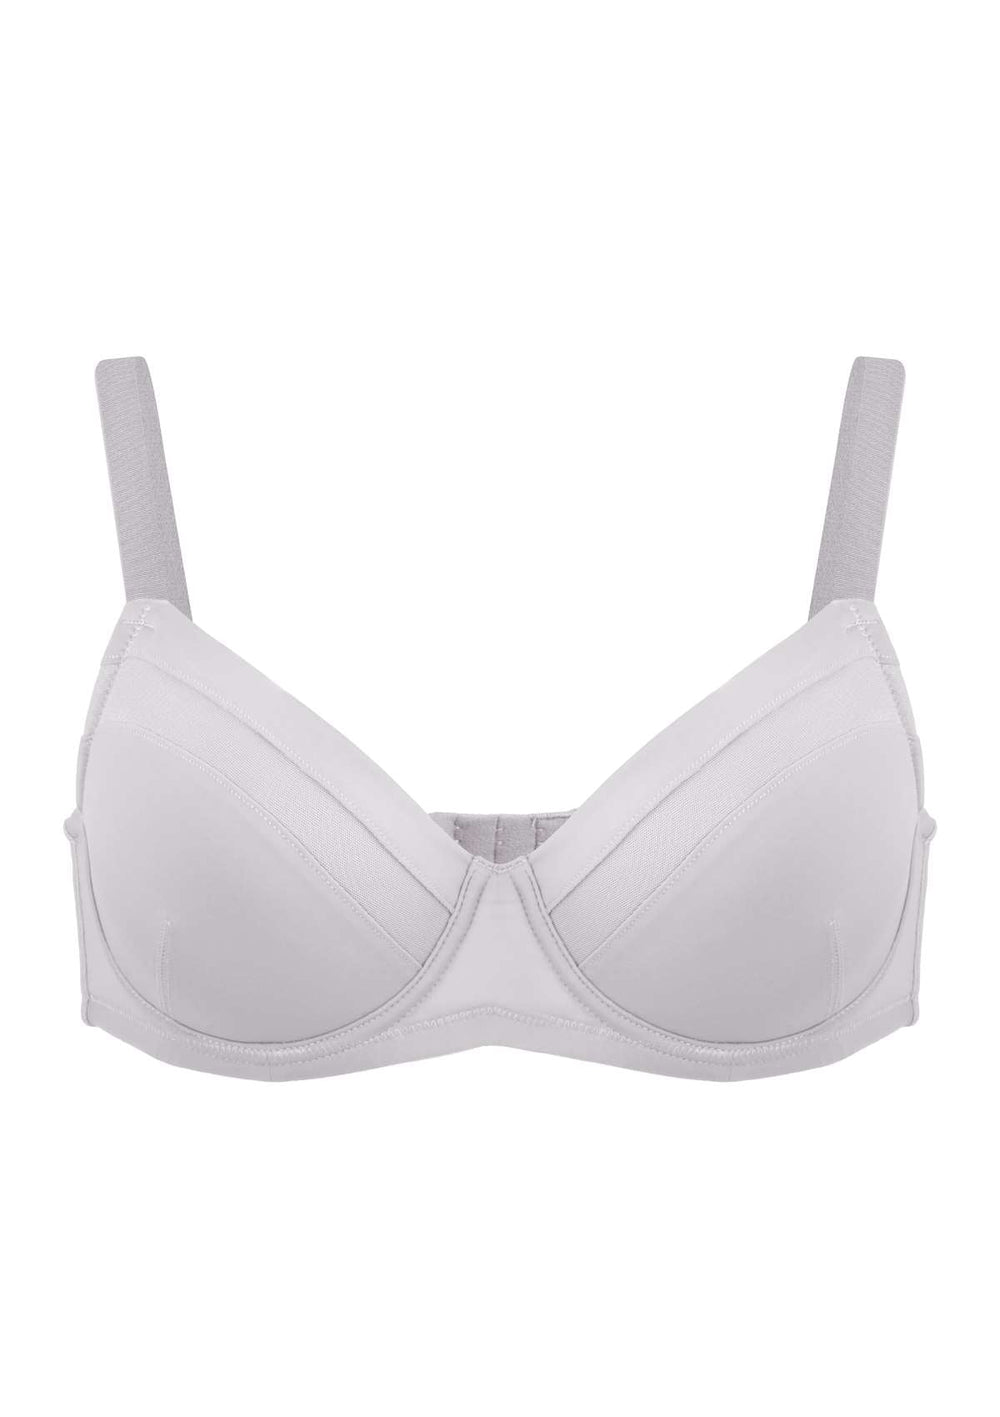 HSIA Bra for Women Push Up,Fashion Deep Cup Bras Lightly - Import It All